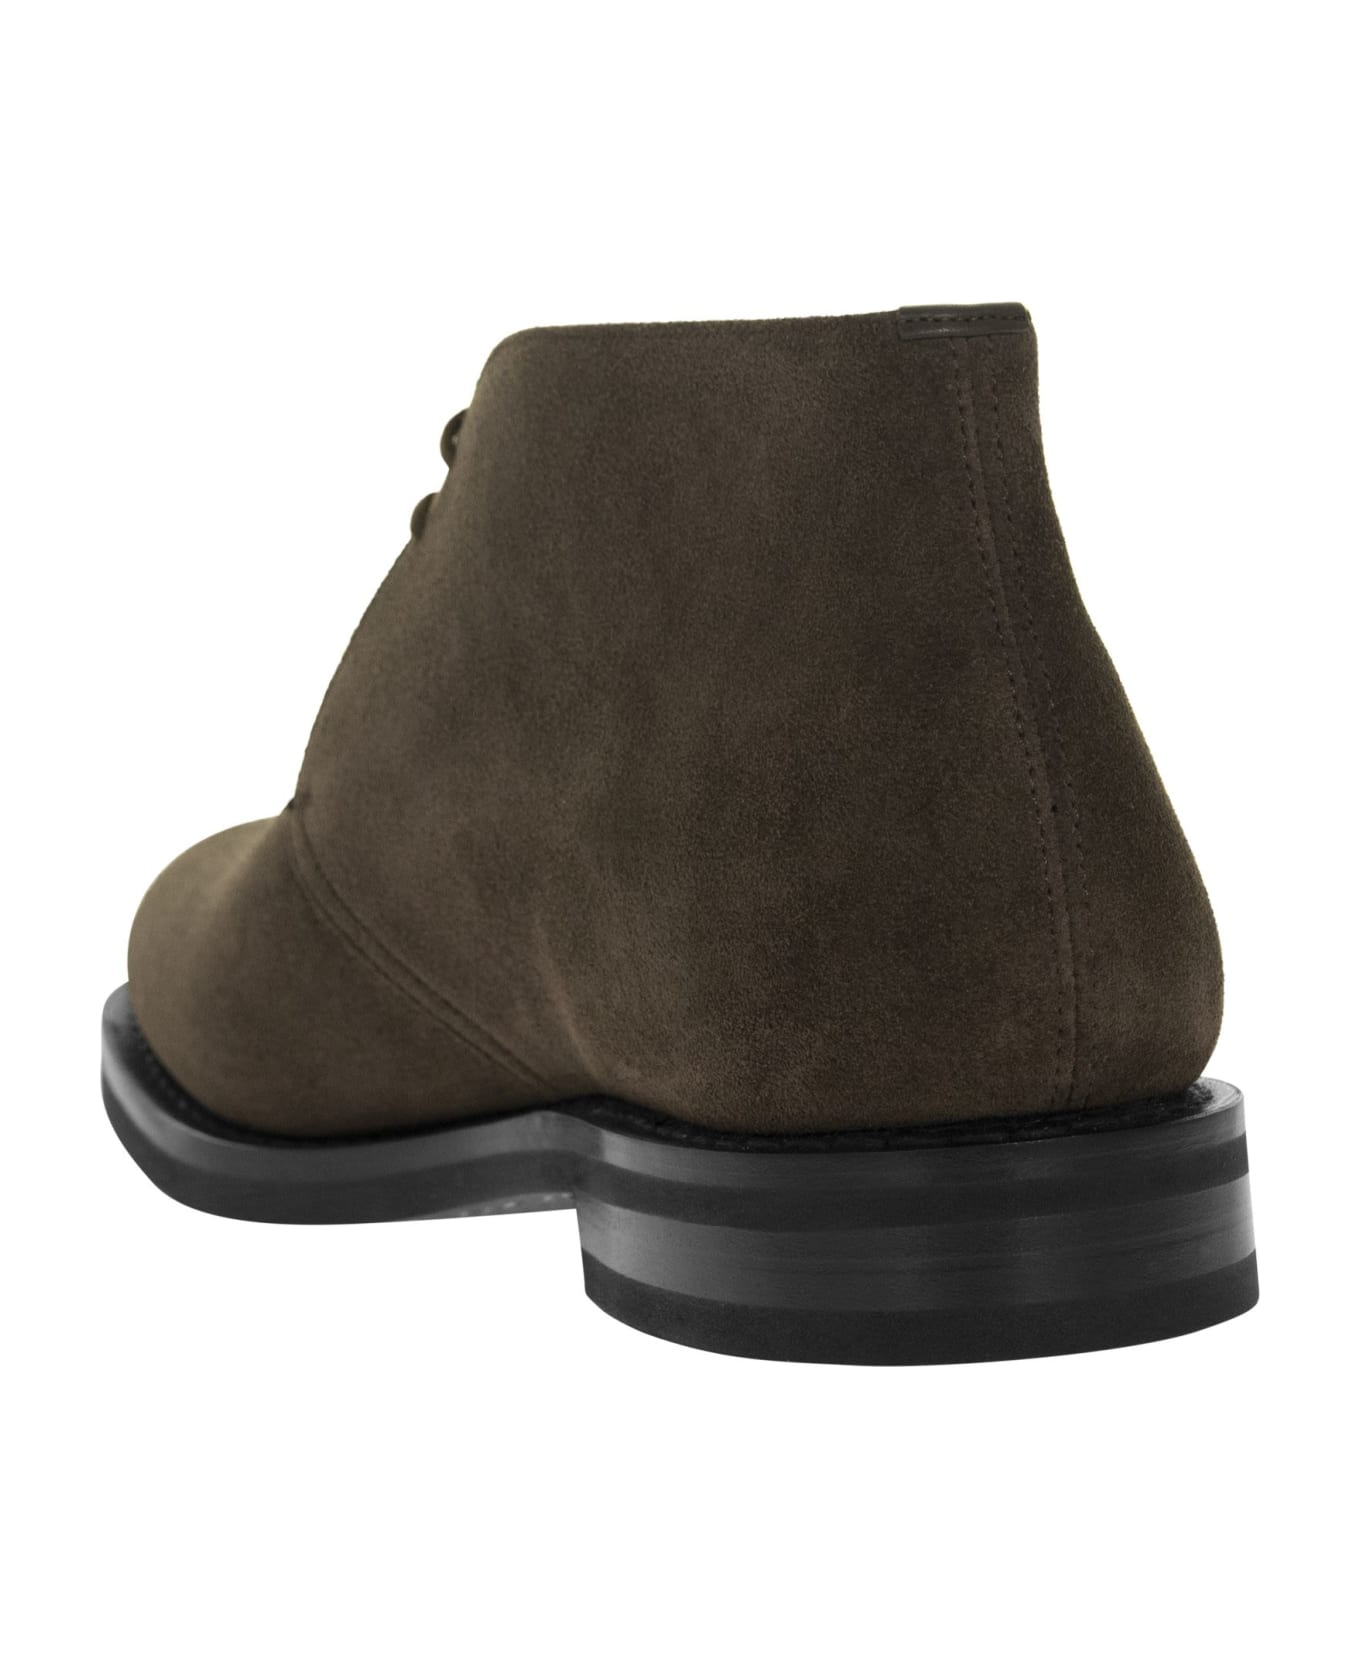 Church's Ryder - Suede Leather Ankle Boot - BROWN